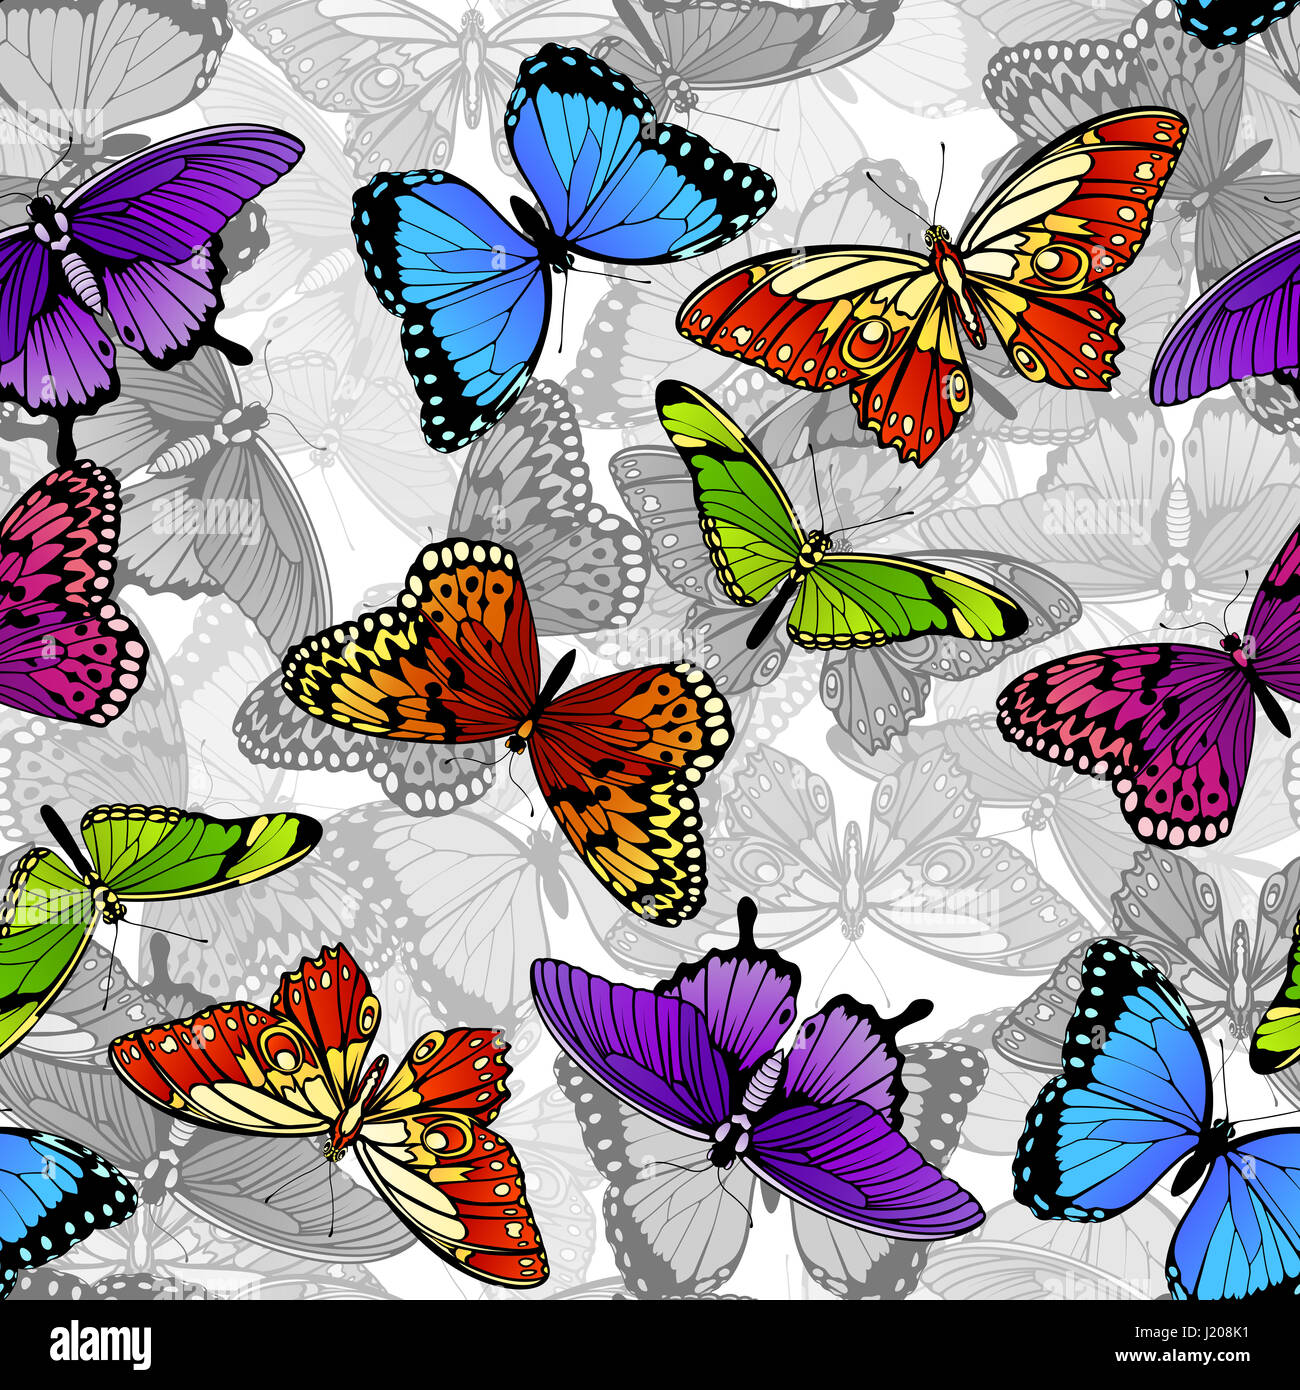 A seamless colorful butterfly background pattern Stock Photo